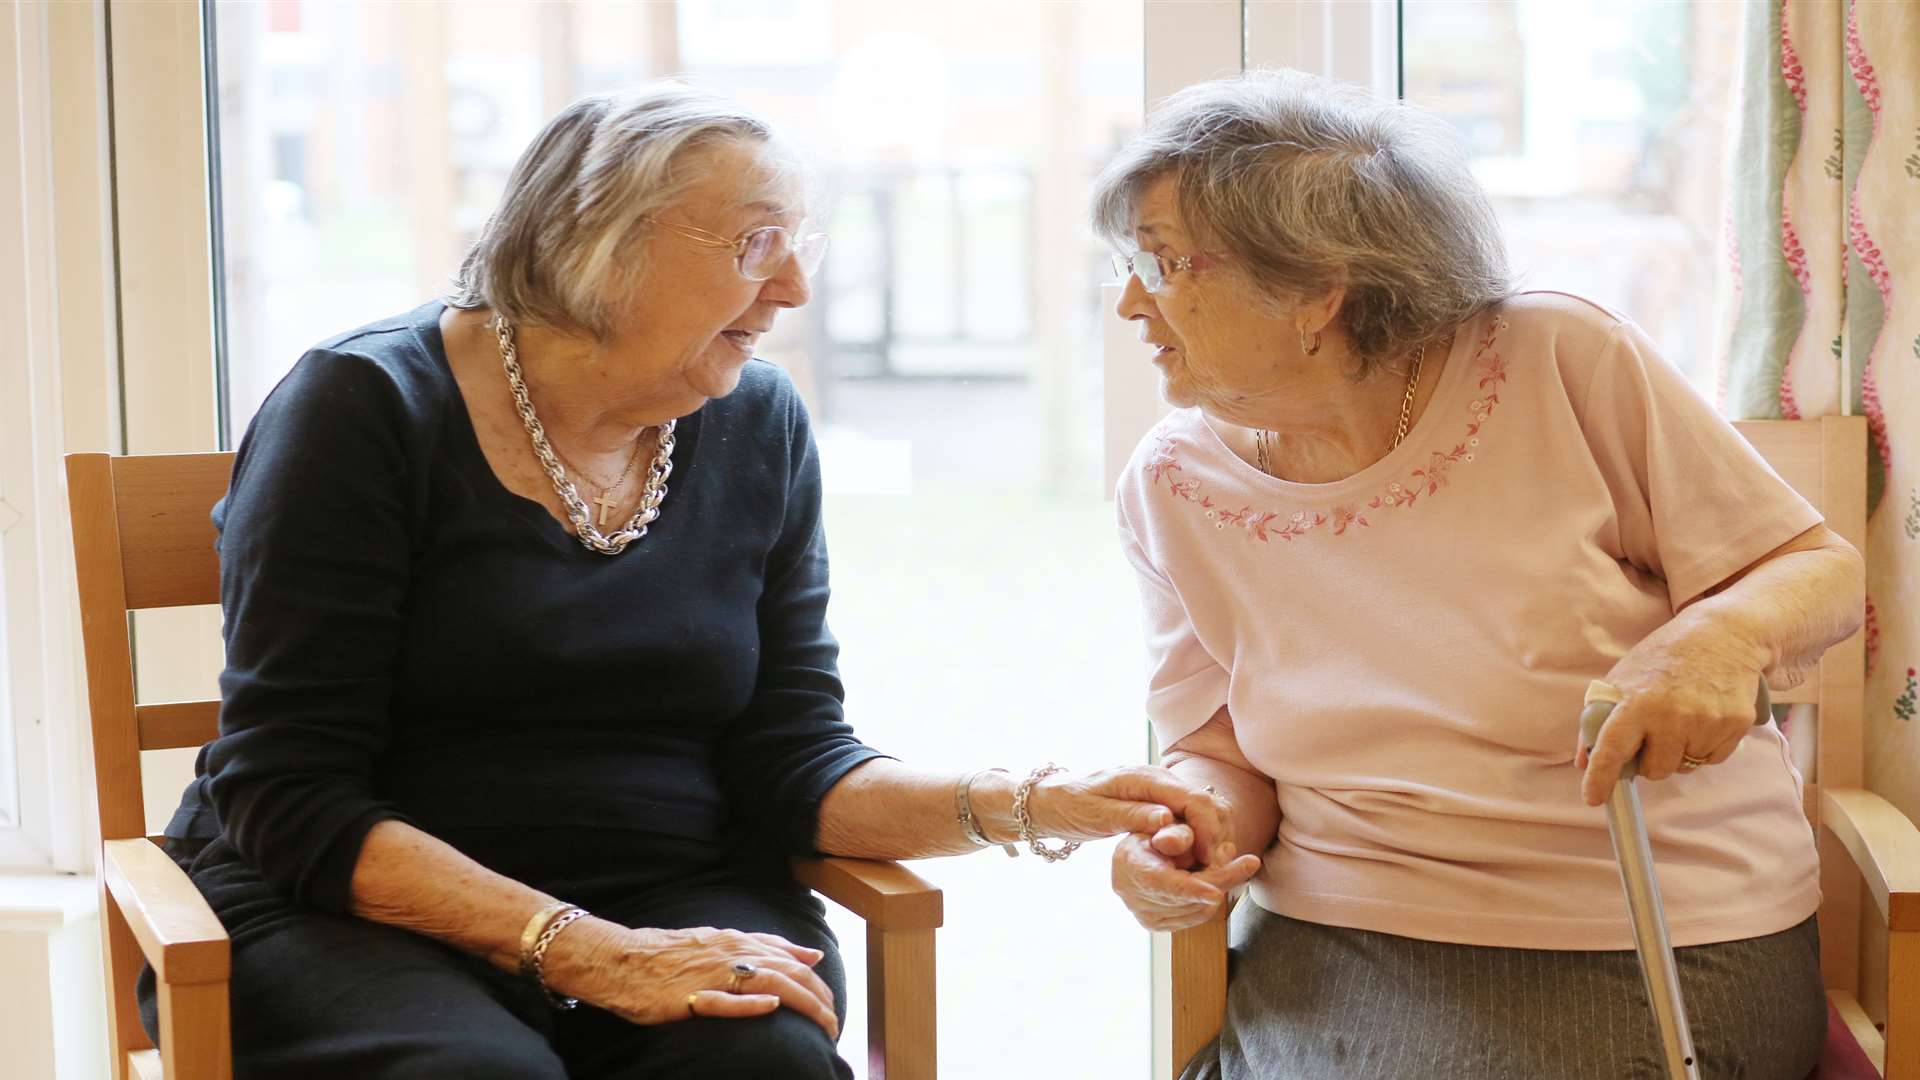 If you're looking for a care home, Avante has an open door policy so you can pop in to any of the homes to see the care on offer